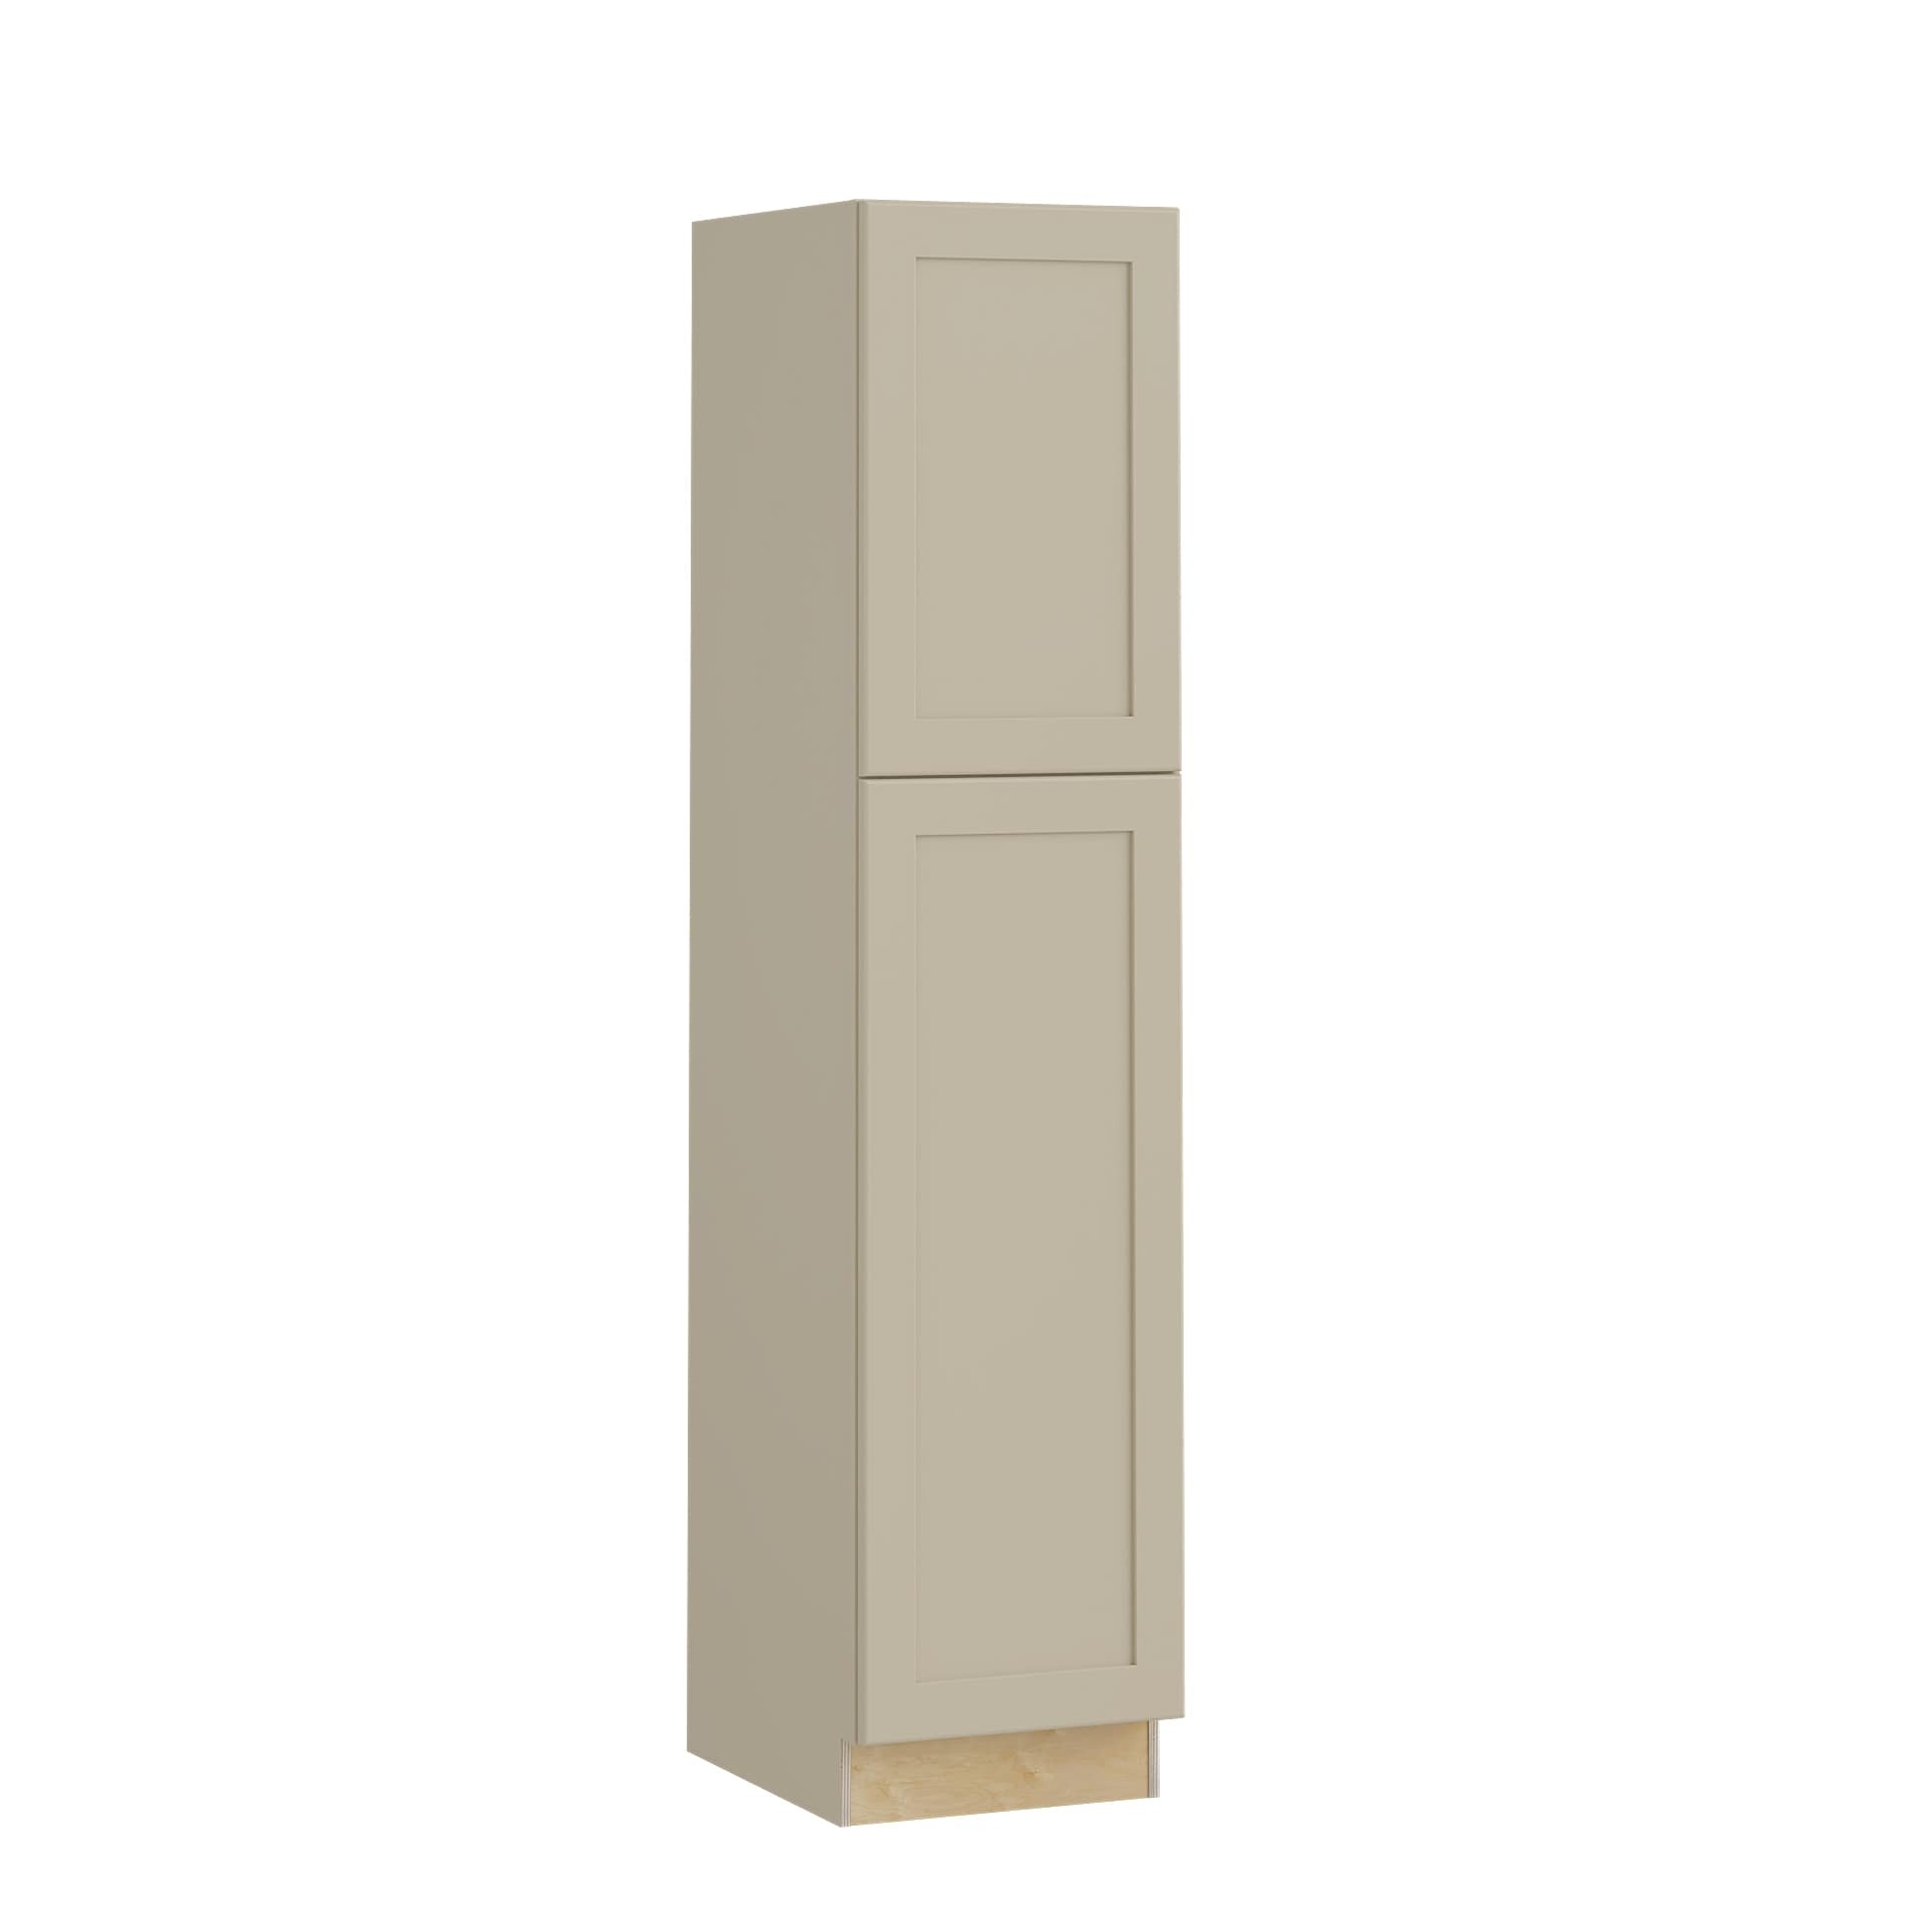 Luxxe Cabinetry 18-in W x 84-in H x 24-in D Norfolk Blended Cream Painted Door Pantry Fully Assembled Semi-custom Cabinet in Off-White | U182484L-NBC